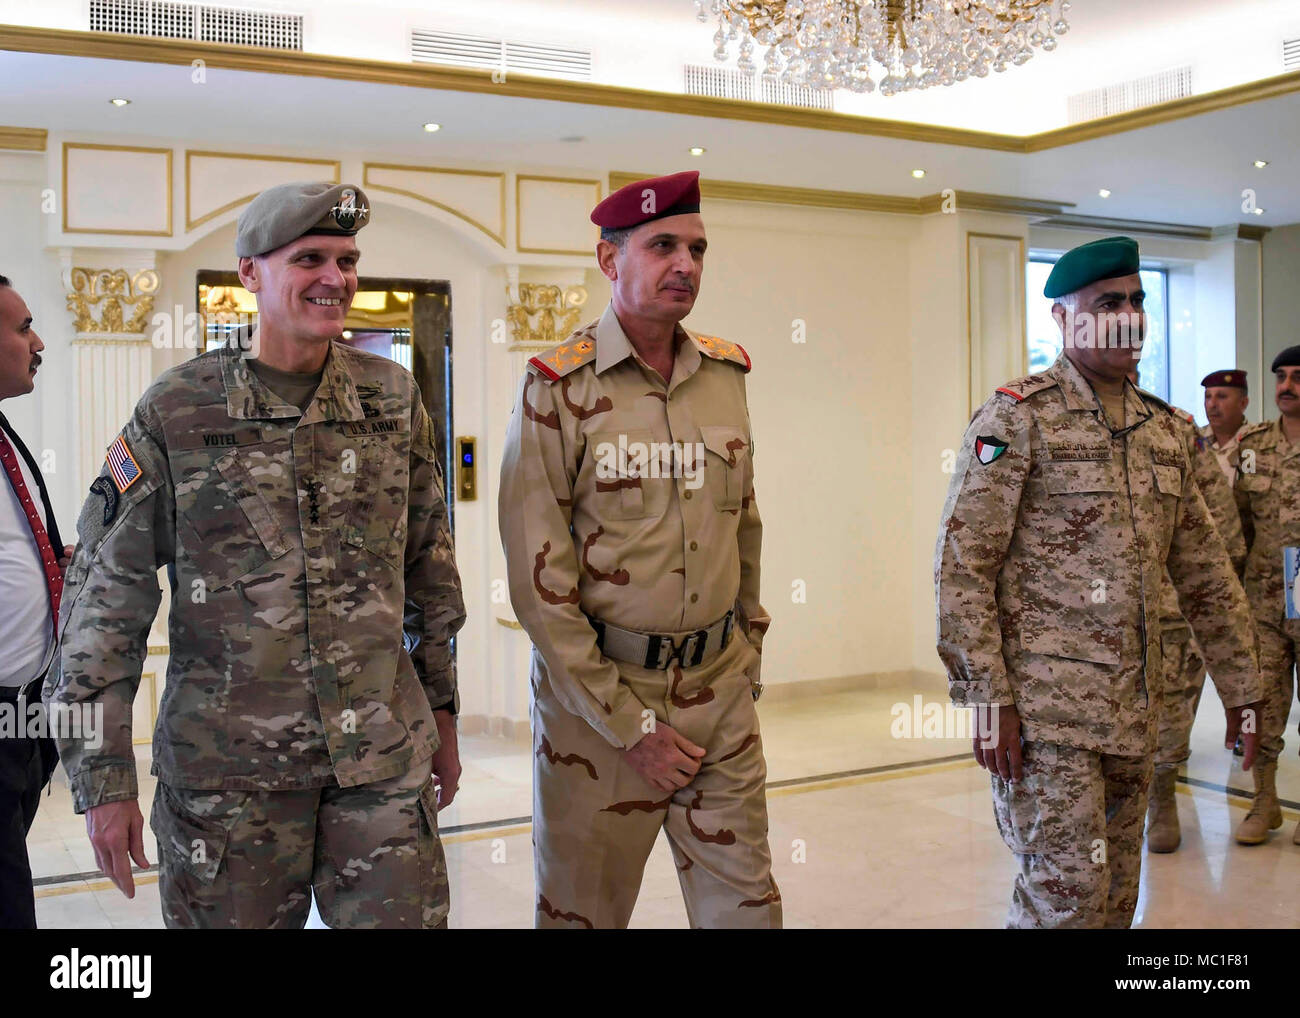 U.S. Army Gen Joseph L. Votel, commander, U.S. Central Command, meets with Gen Othman al-Ghanimi, Chief of Staff, Iraqi Army, and Lt Gen Mohammed Khaled Al-Khadher, Chief of Staff, Kuwait armed forces, January 23, 2018. Votel met with key military leaders at the US, Iraq, and Kuwait Chief of Staff tri-lateral discussions during his recent USCENTCOM area of responsibility trip. (U.S. Air Force photo by Tech Sgt. Dana Flamer) Stock Photo